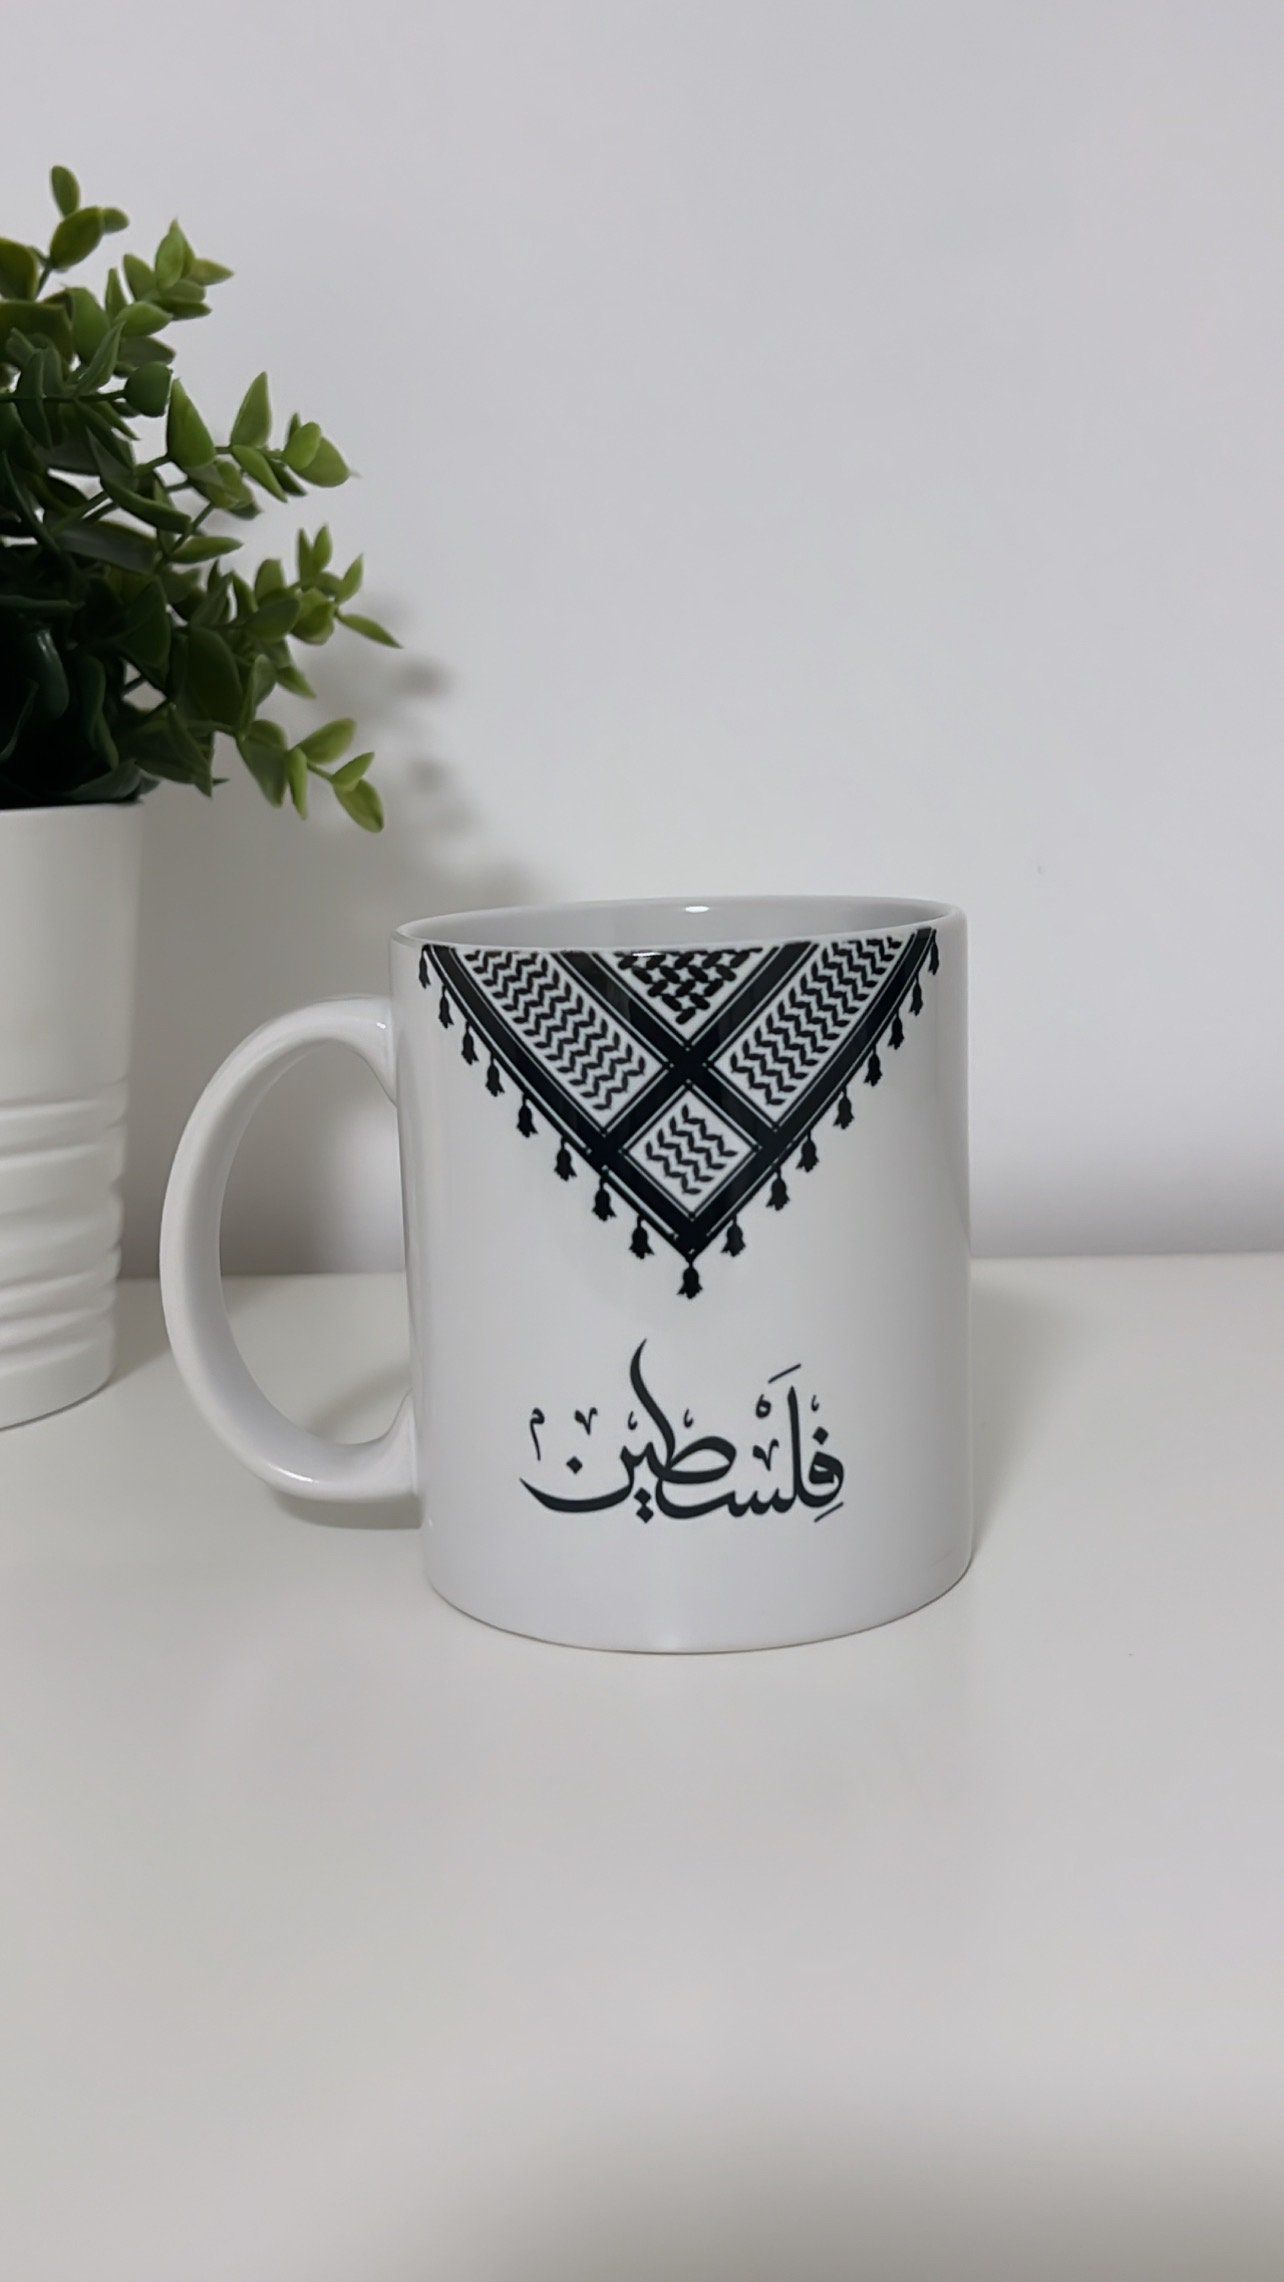 Kuffya Tea Coffee Cups Set Set of 6 Cups Teacups Set Palestinian Decoration  Art Palestinian Kitchen Gift Home Welcoming Gift 